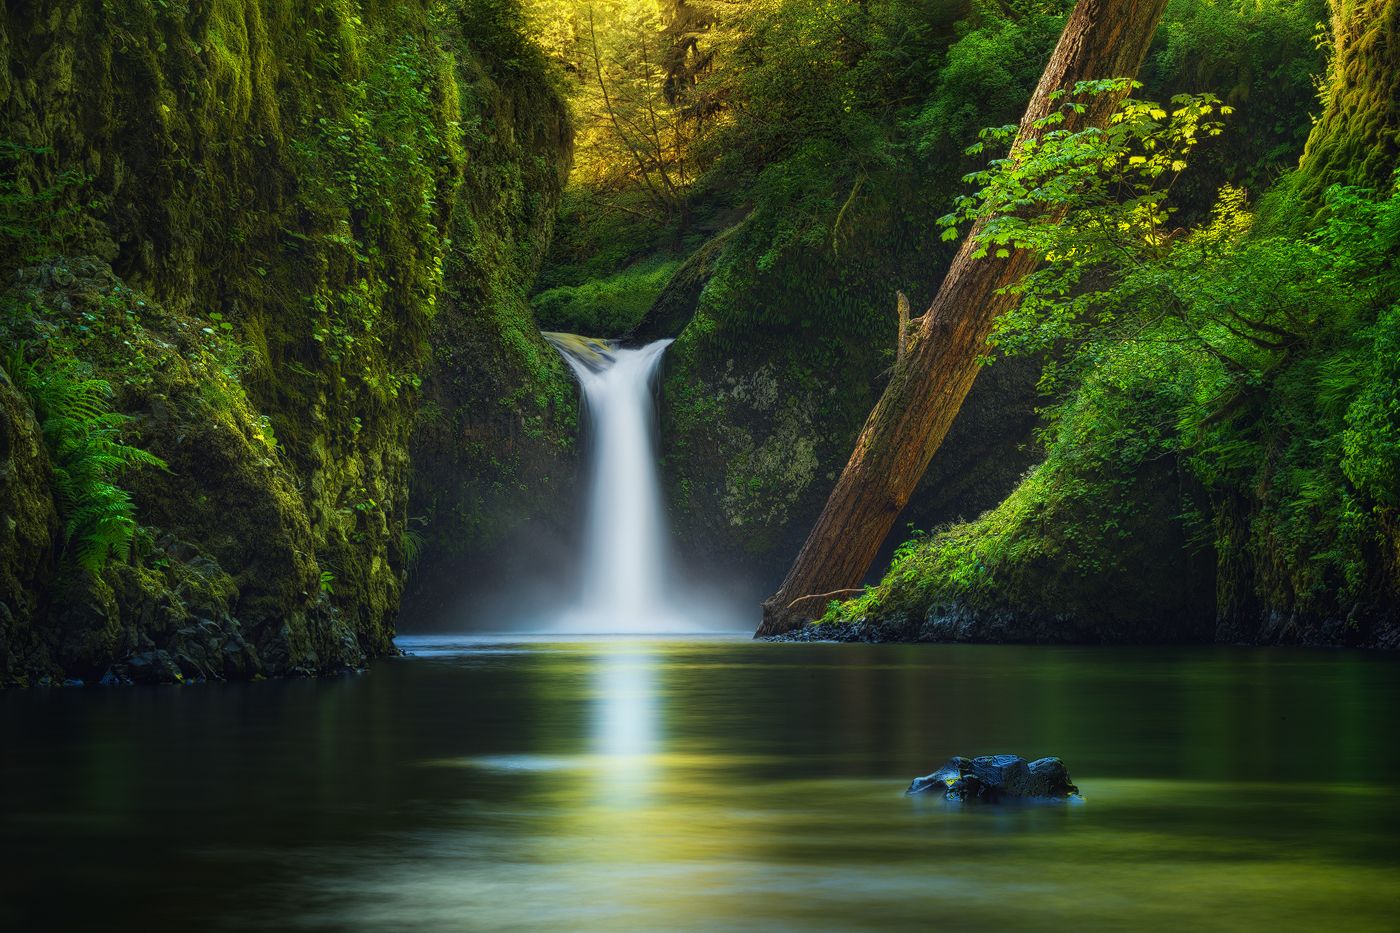 I took this shot of Punch Bowl Falls in Oregon last Spring. It is a lush, green paradise on earth. By Victor Carreiro